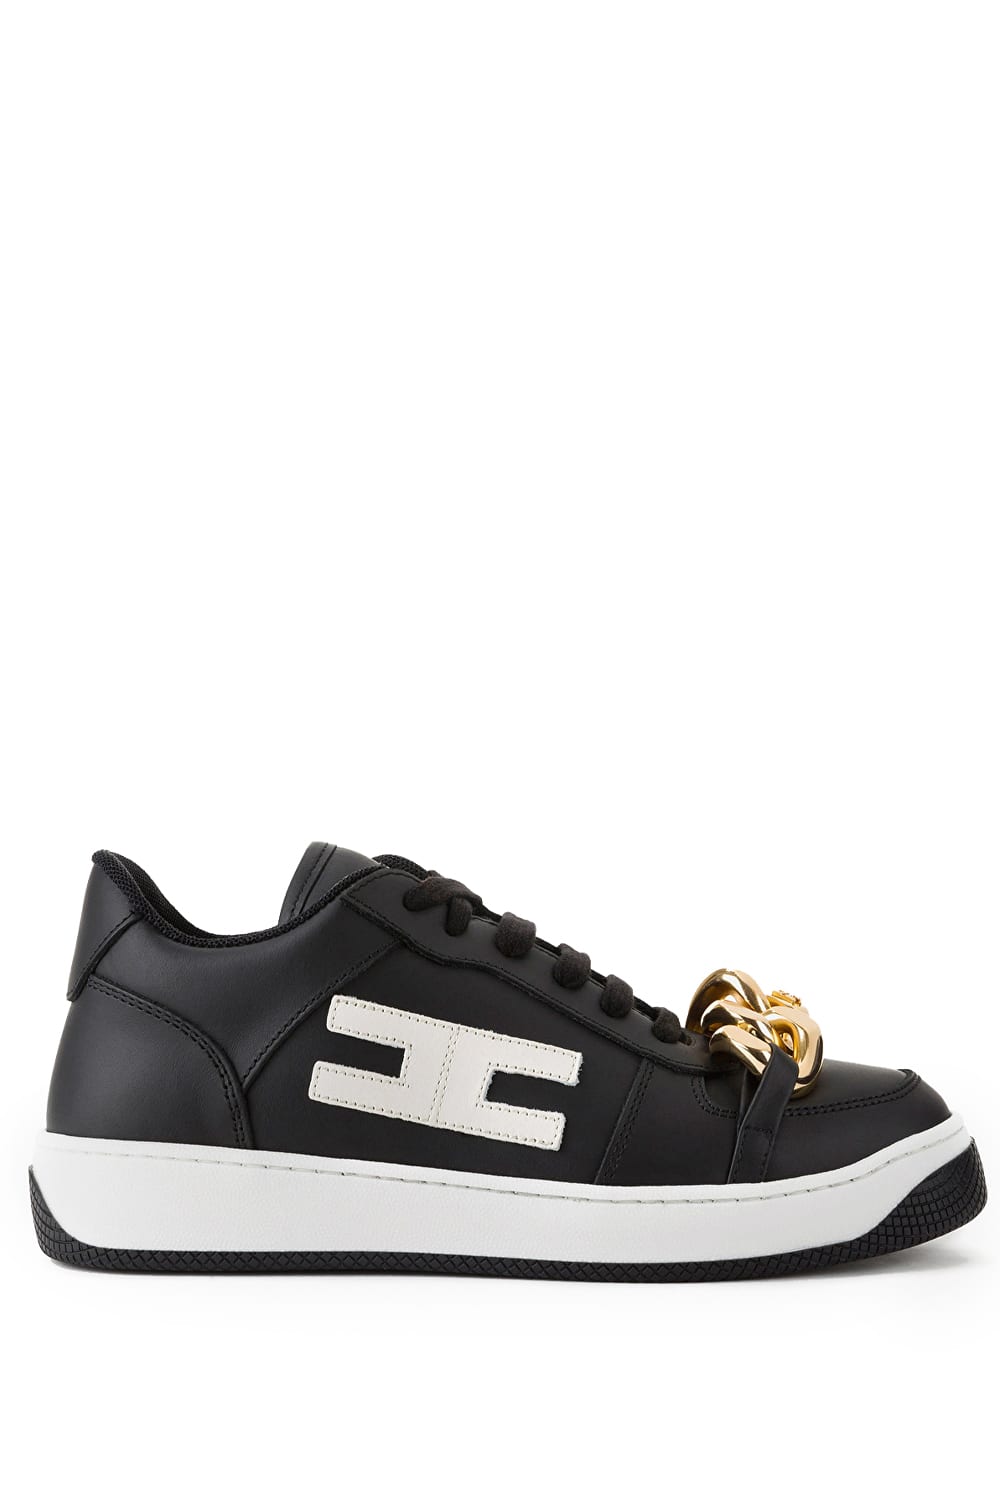 Elisabetta Franchi Sneakers With Chain